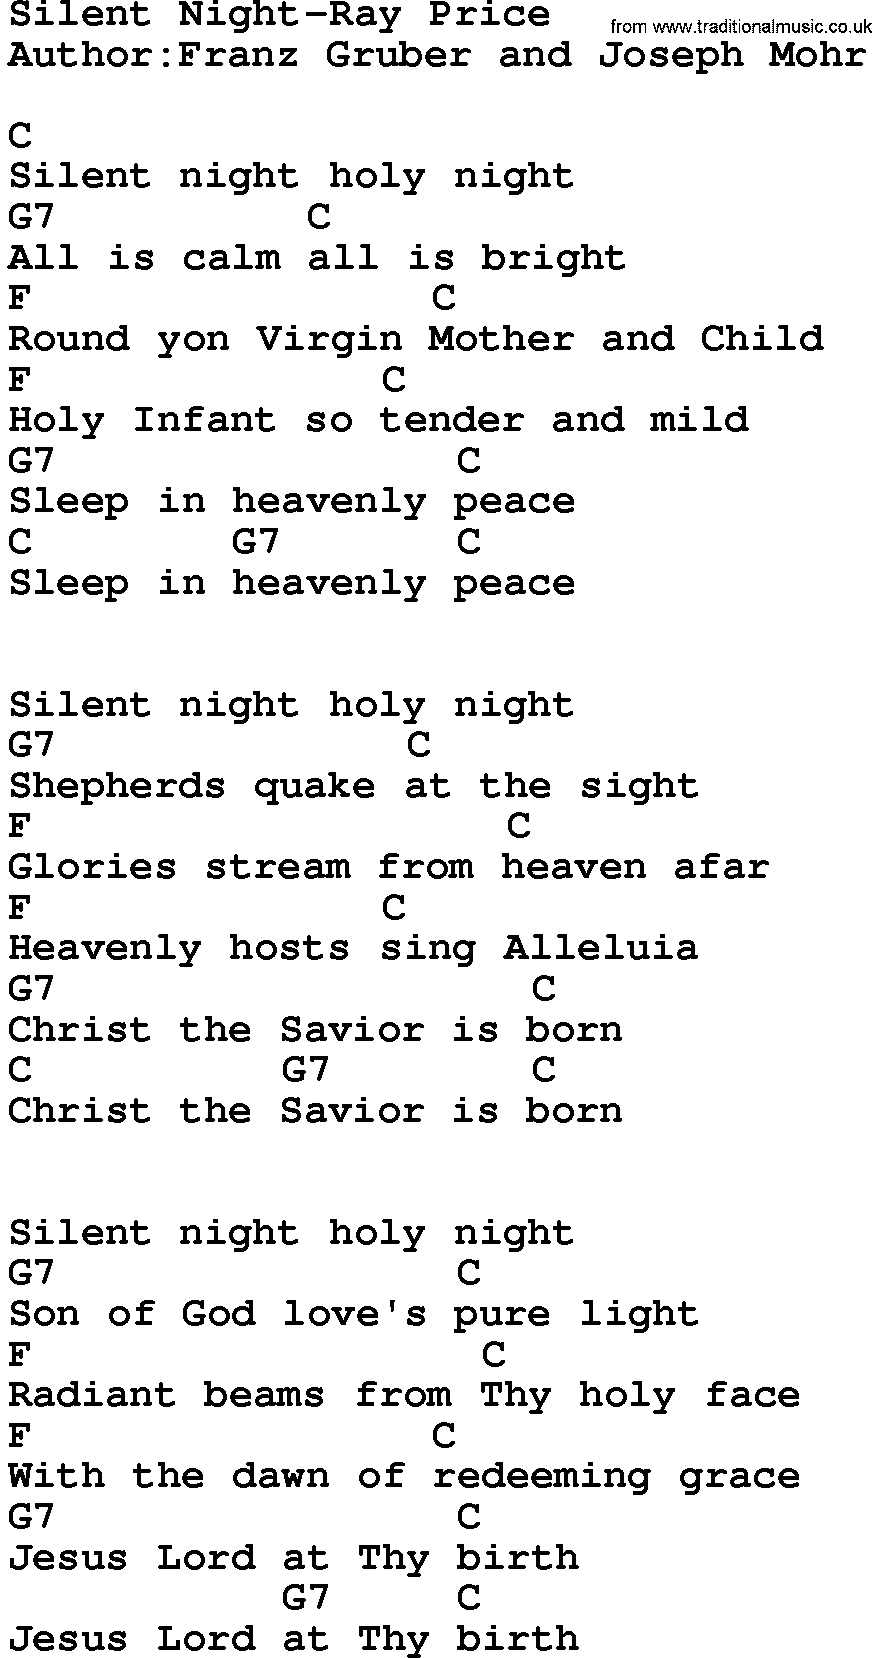 Country music song: Silent Night-Ray Price  lyrics and chords